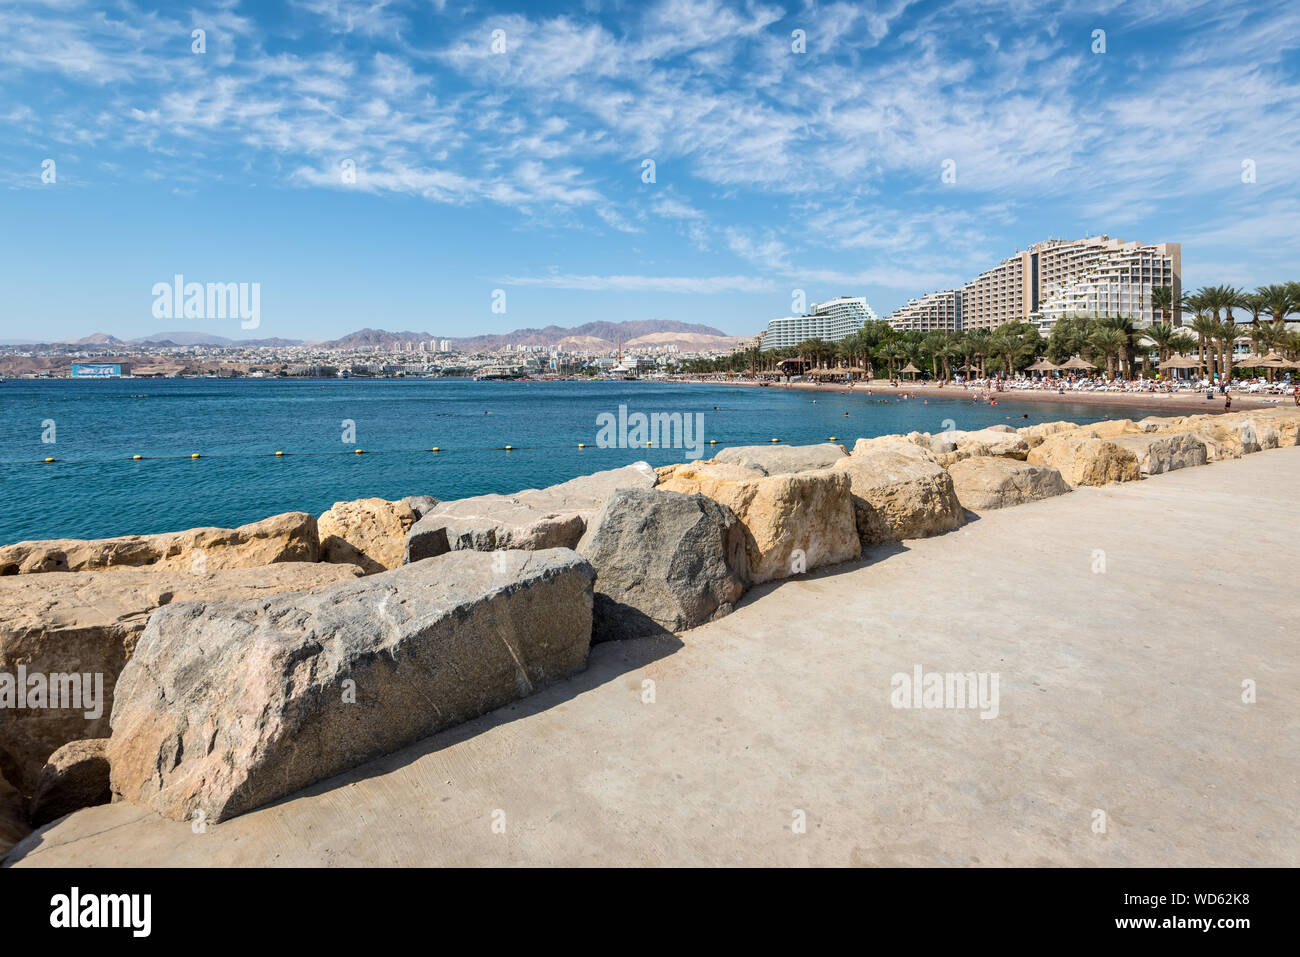 Eilat, Israel - November 7, 2017: The new harbor with the scenic stone pier is the best place to overlook the center of the beautiful resort of Eilat, Stock Photo